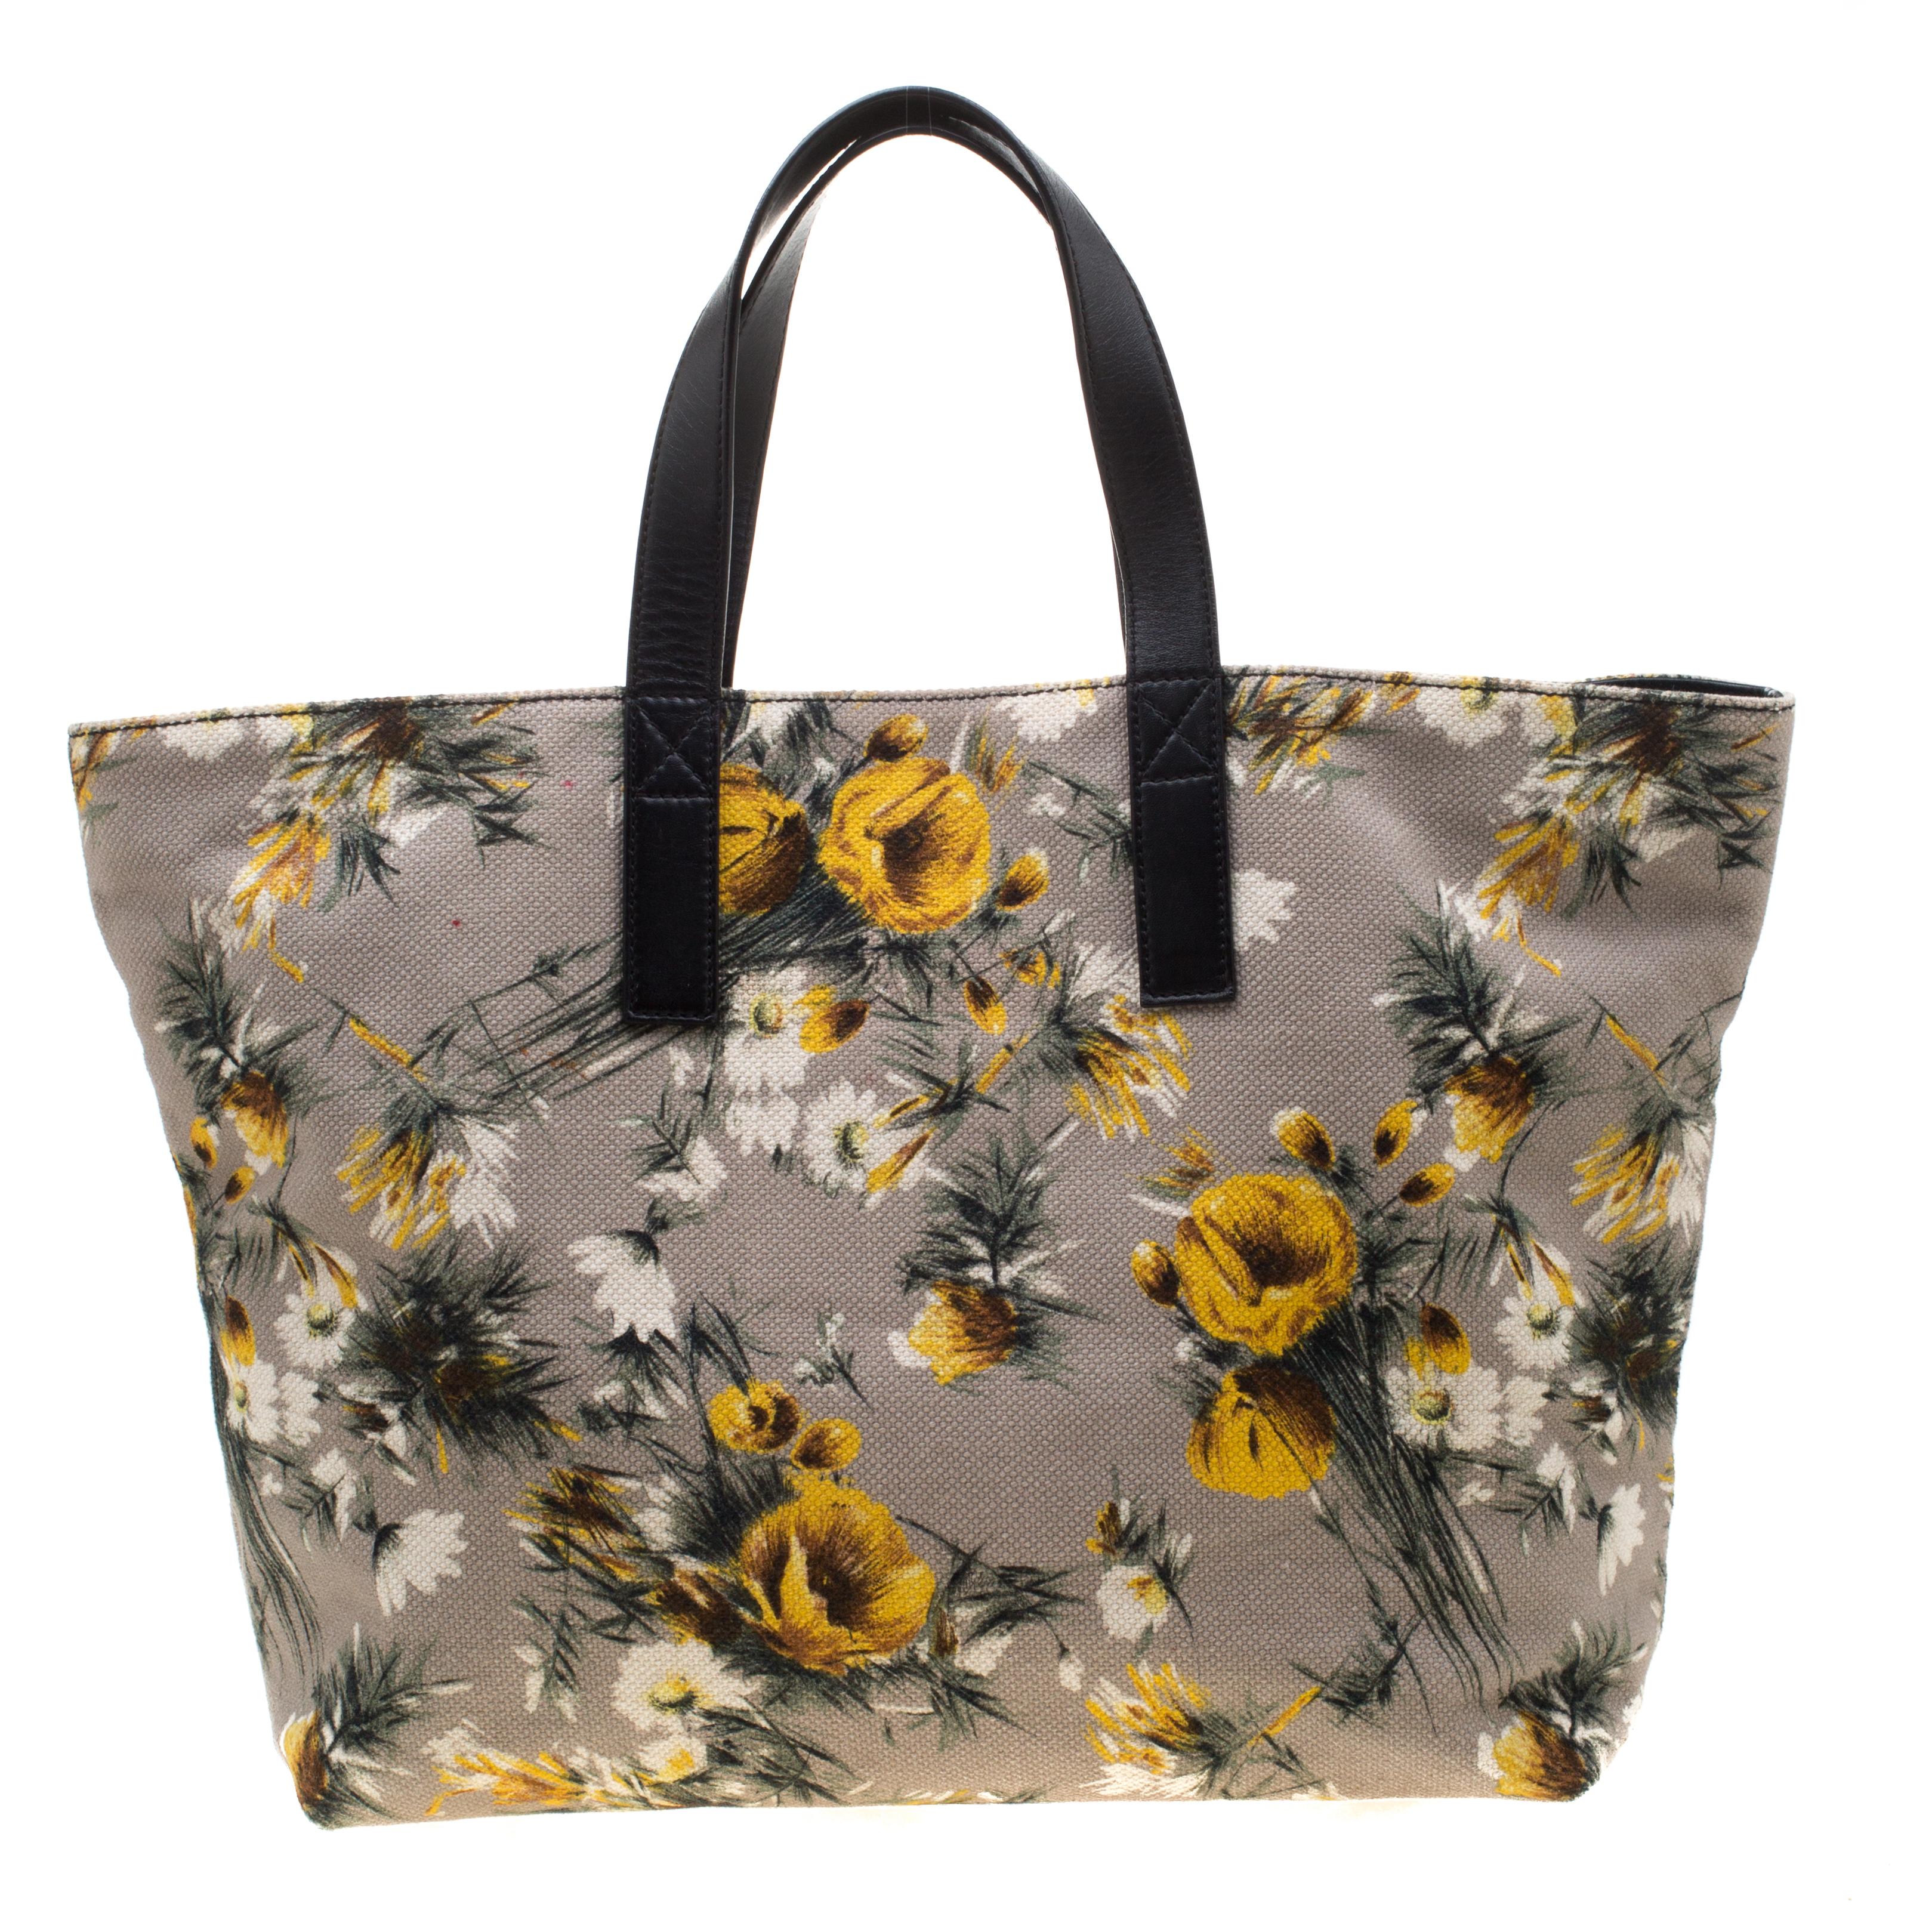 This floral-printed canvas and leather tote is apt for daily use With an expertly lined fabric interior and two leather handles, this can accommodate all your essentials. This piece, from Dolce & Gabbana, is a note on utility and designing.

